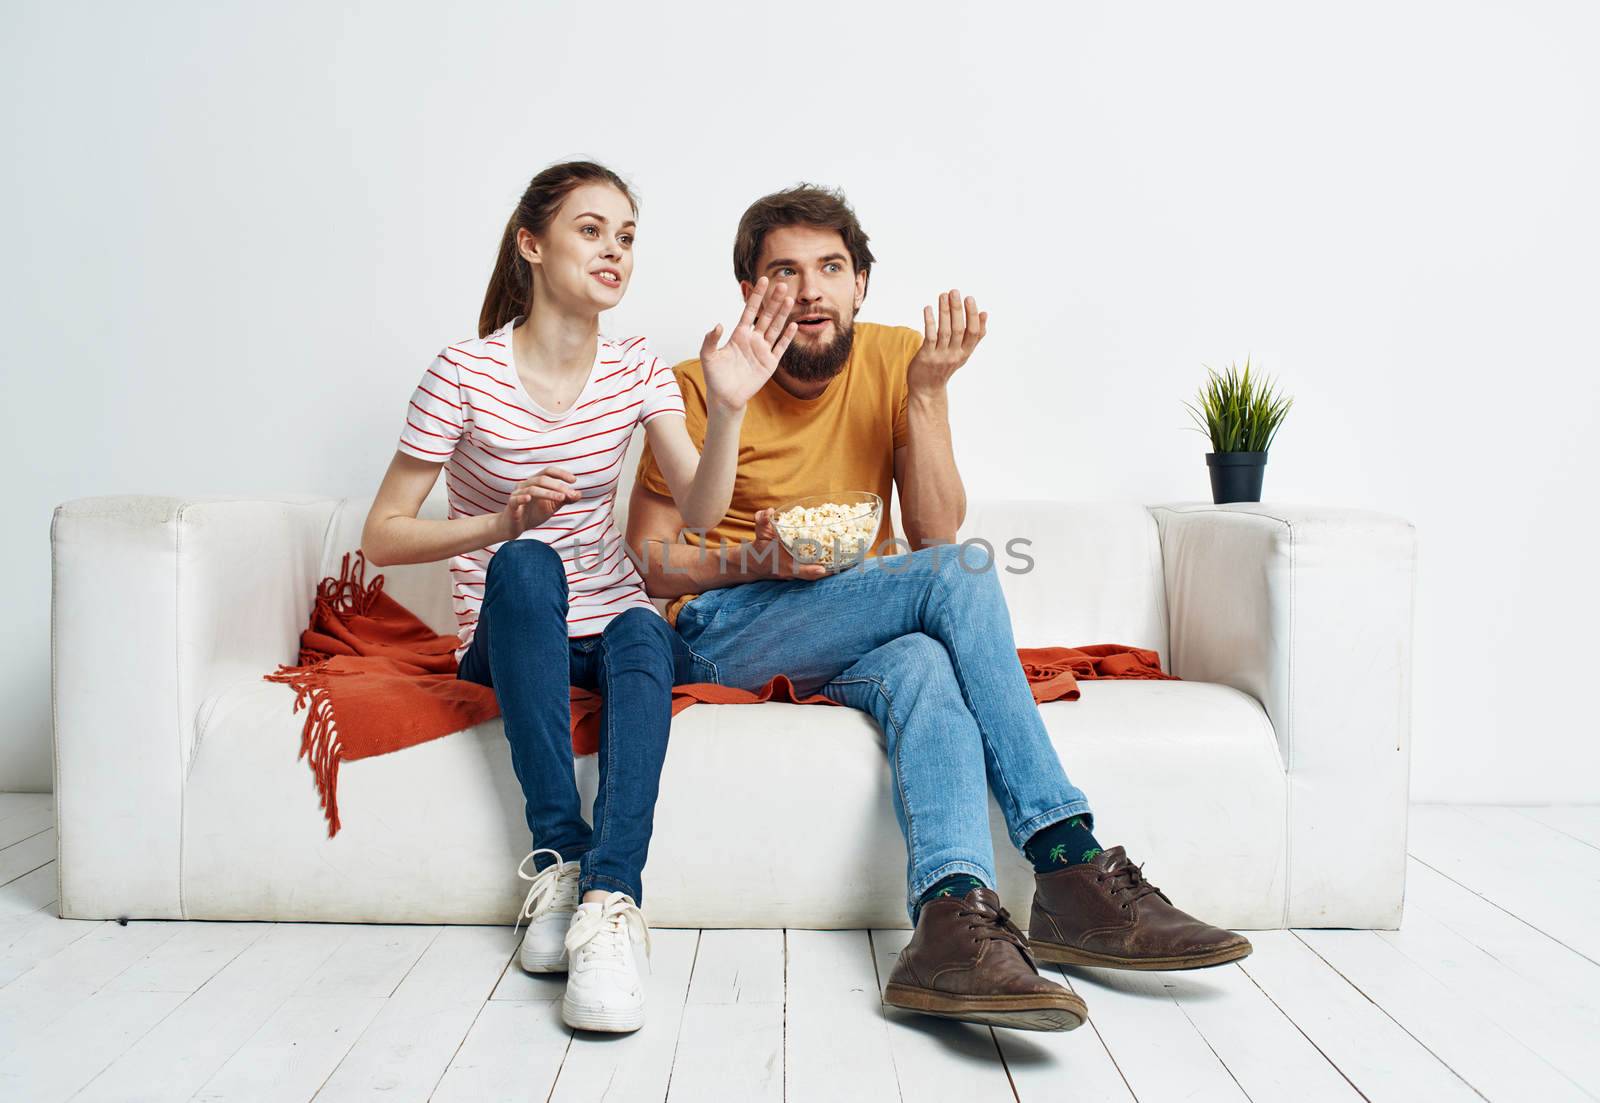 Pretty woman and bearded man watching TV on the sofa indoors. High quality photo